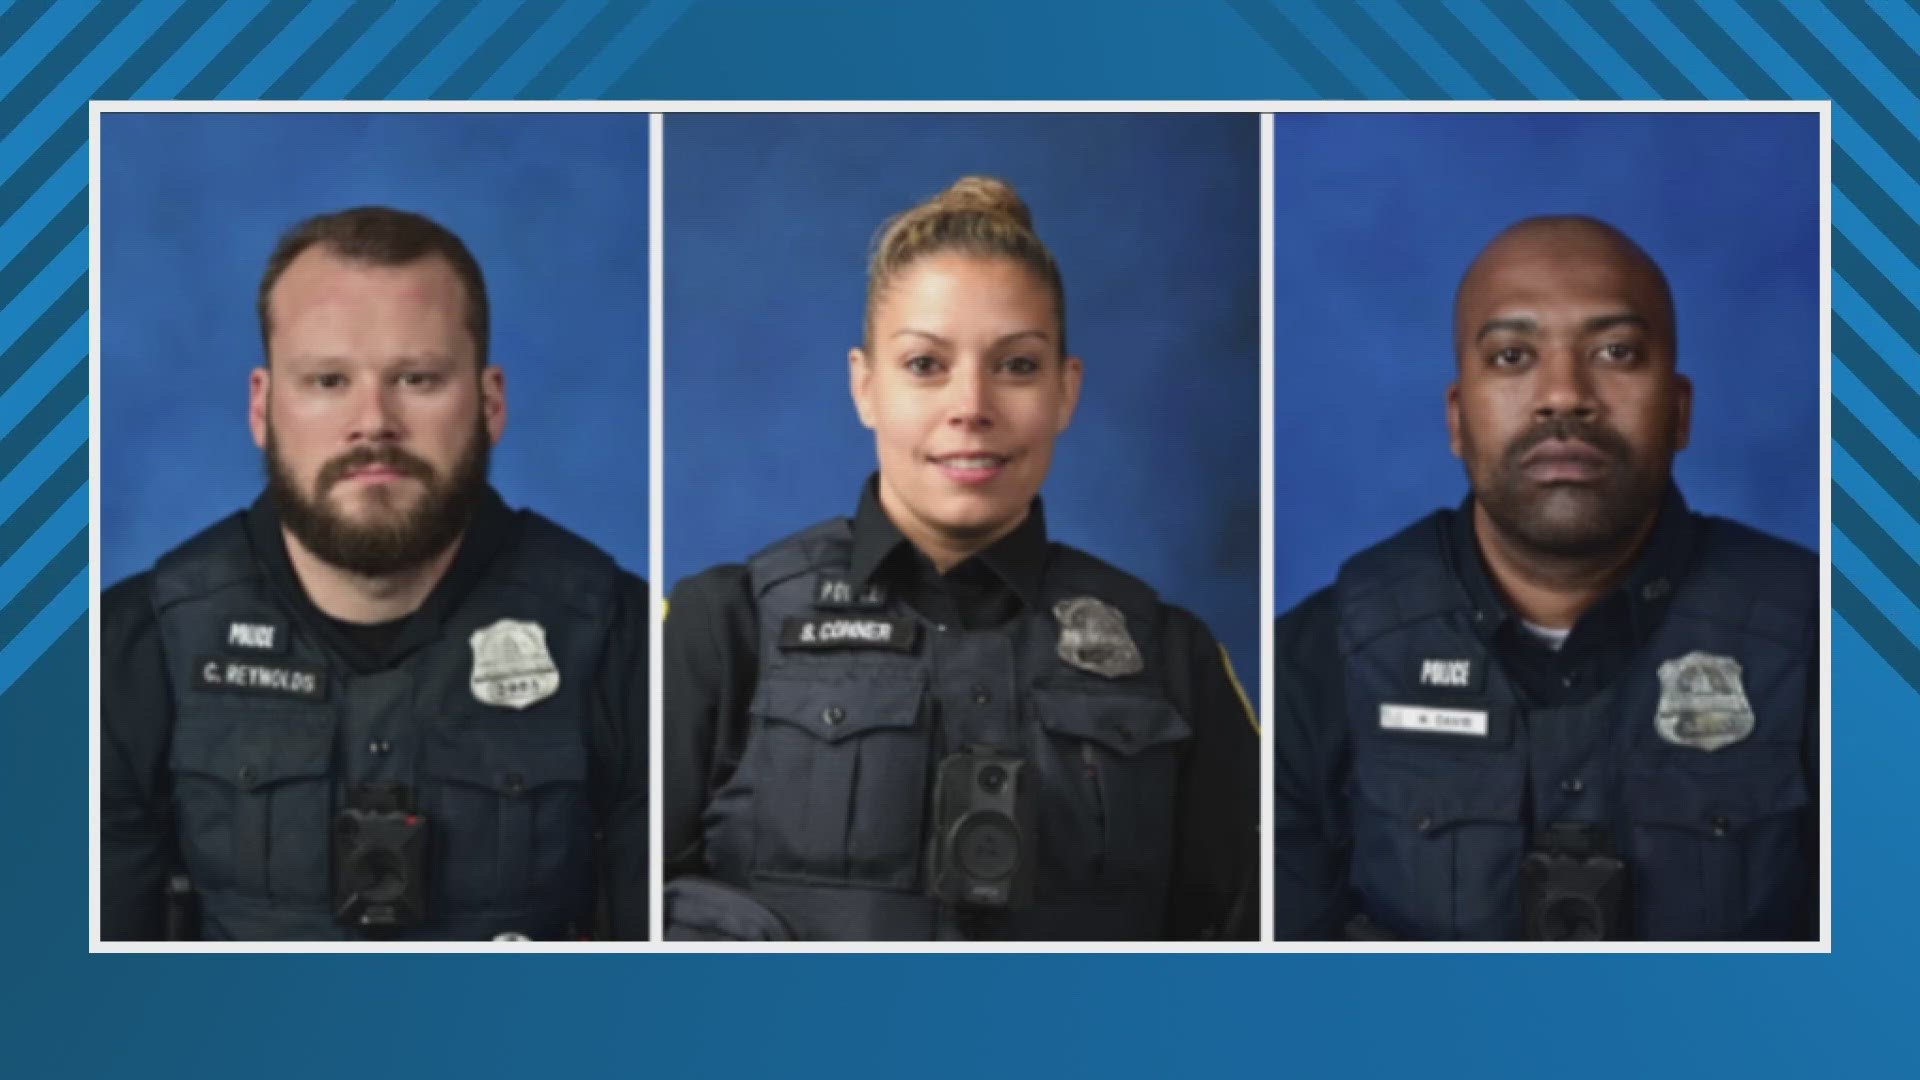 Here are the officers being honored -- Detective Cameron Reynolds, Officer Sara Conner and Officer Wilbert Davis.